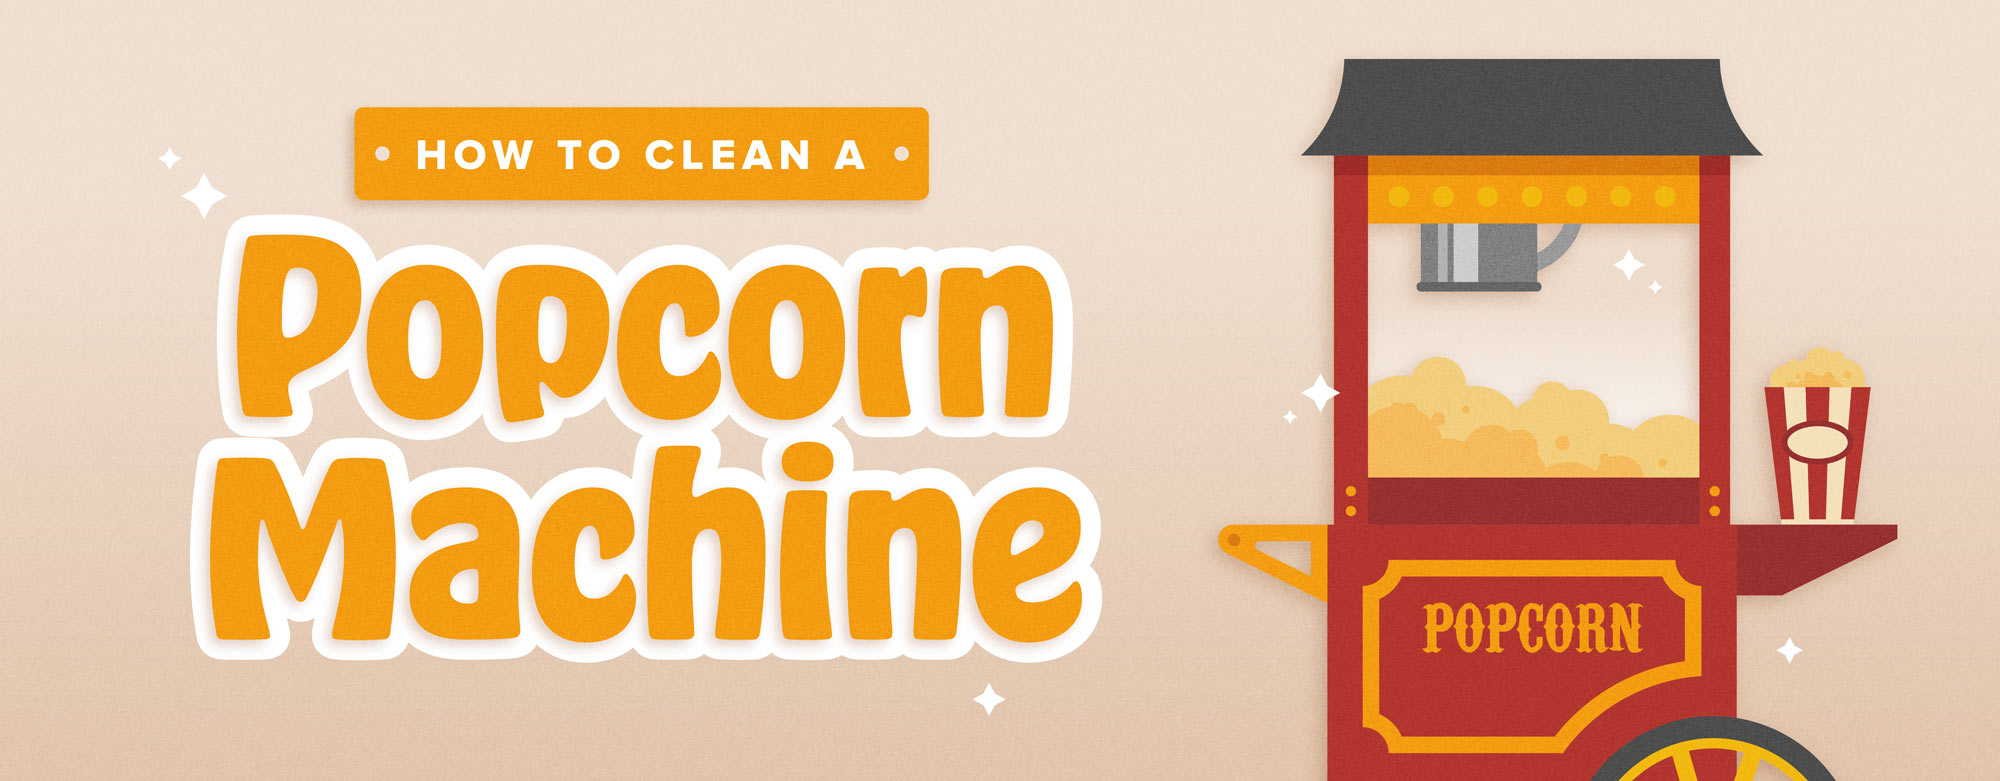 How to Clean a Popcorn Machine